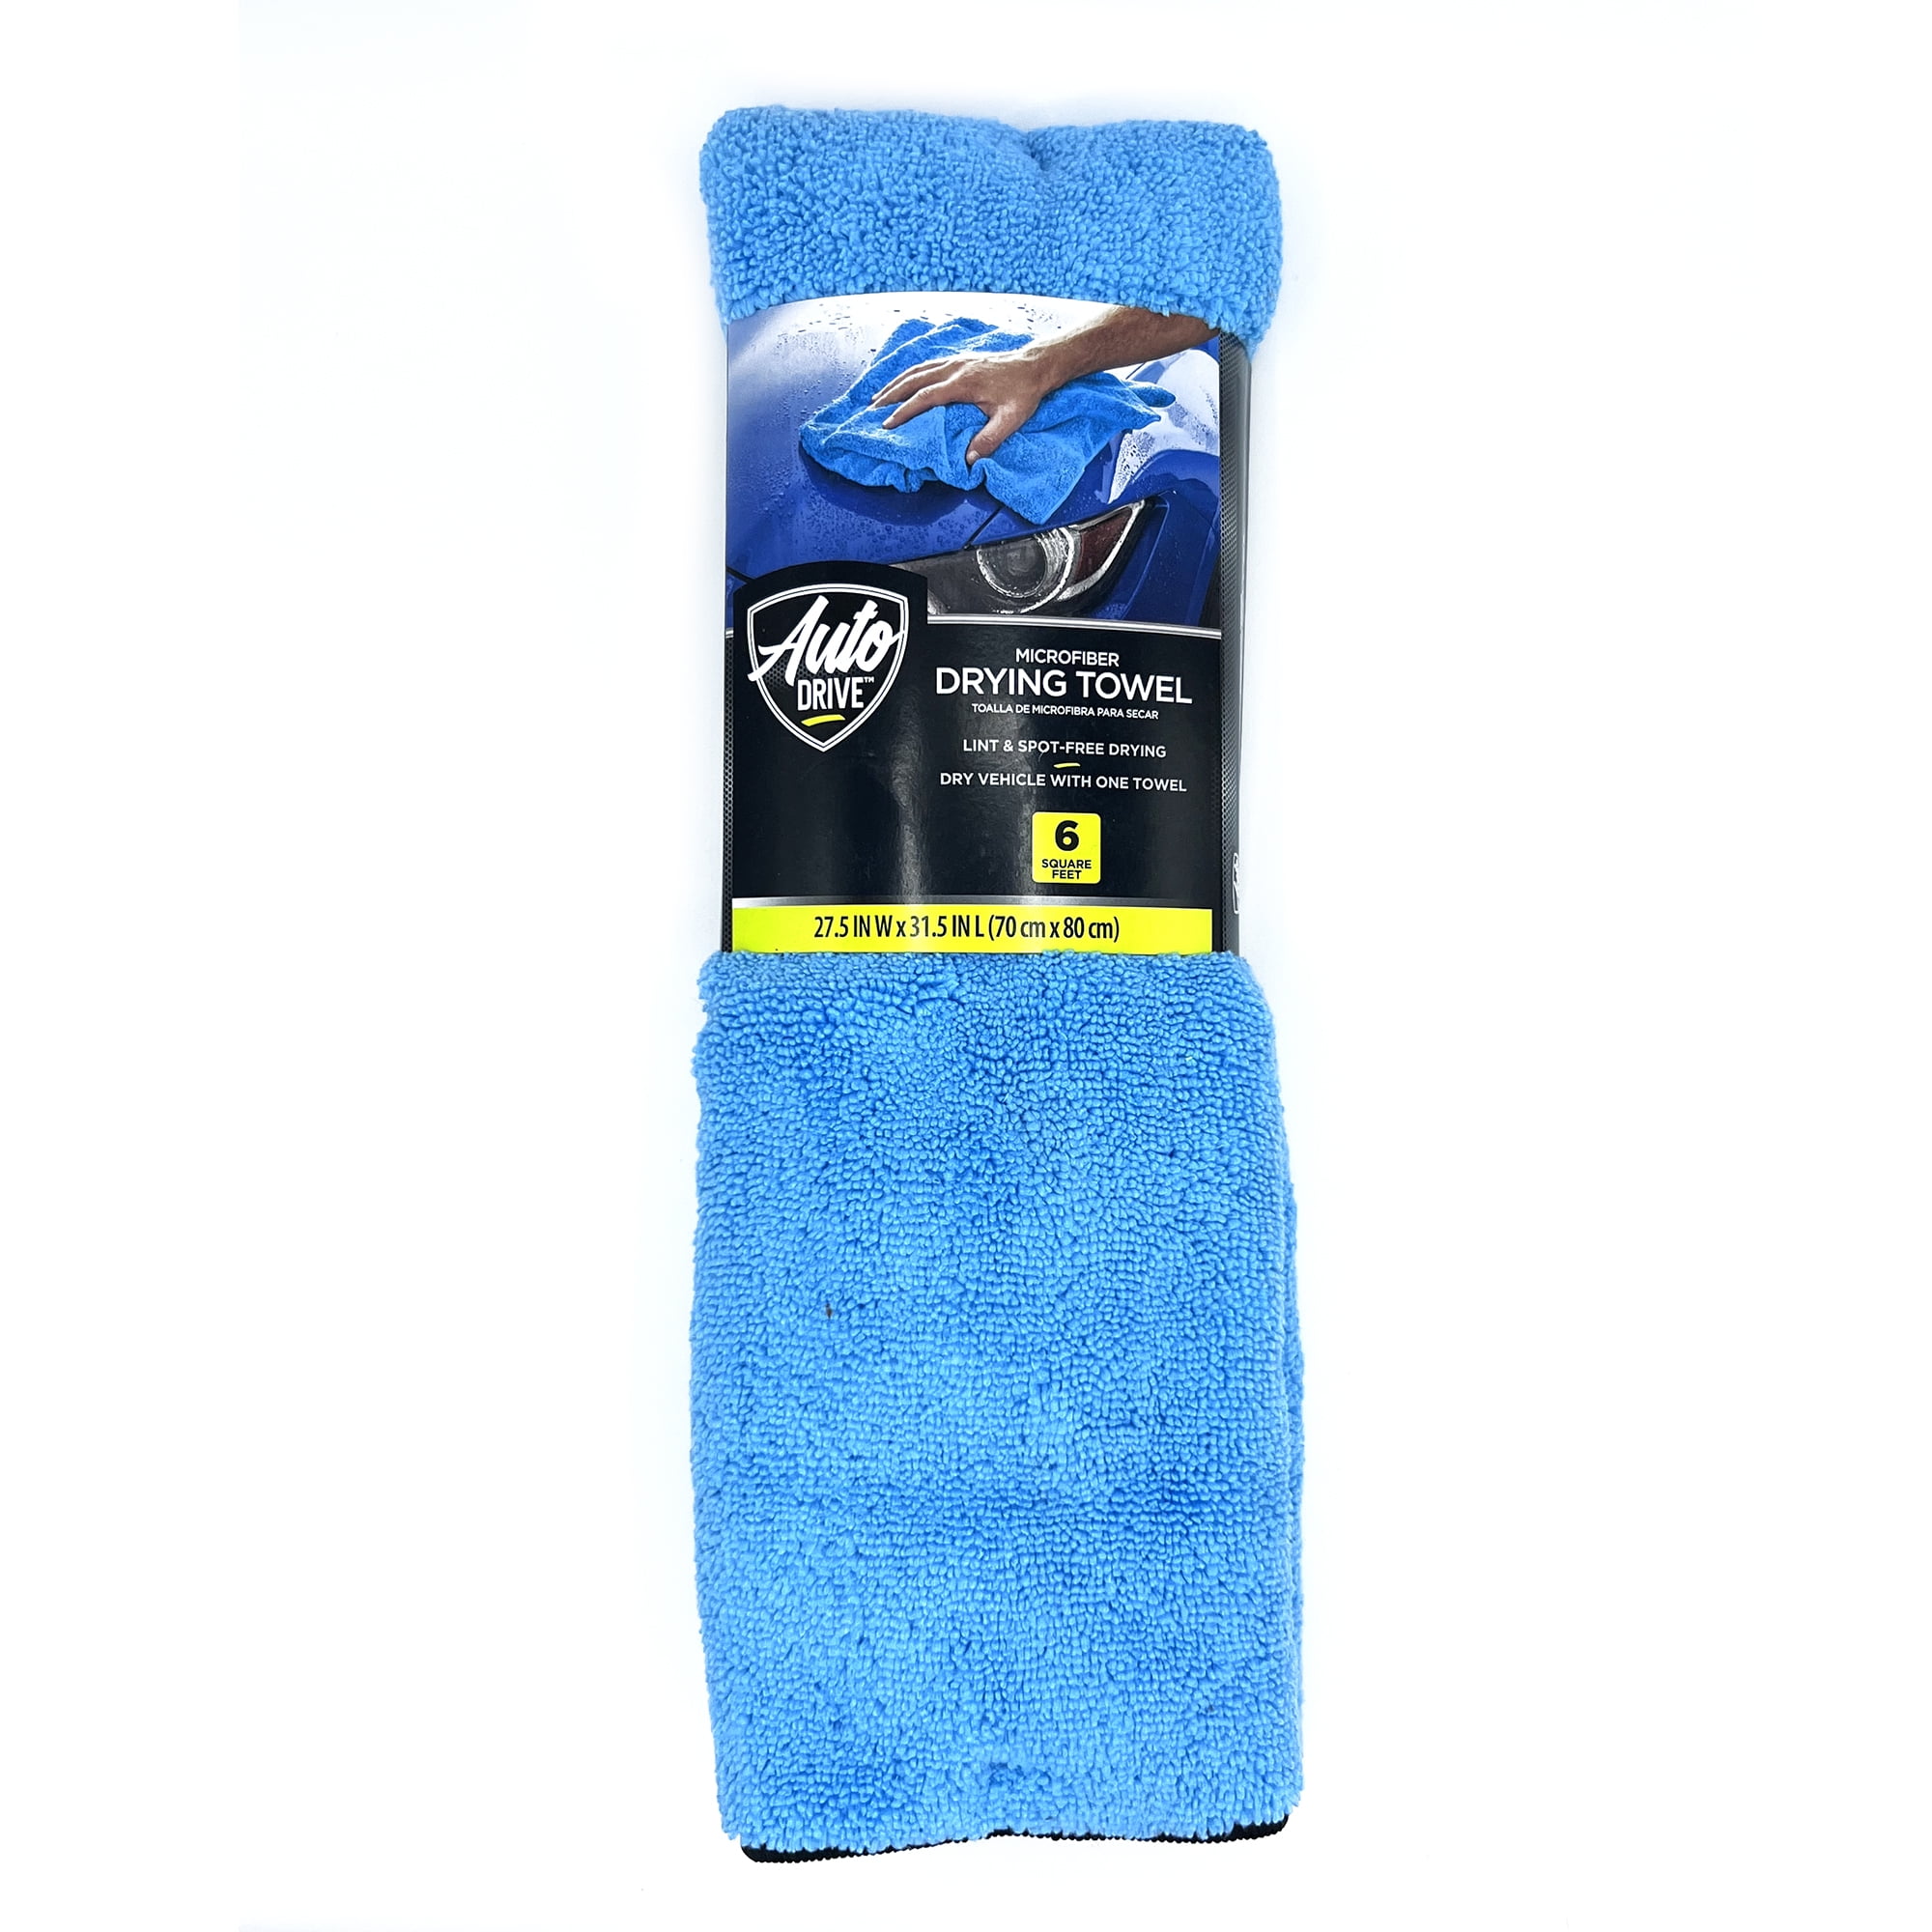 WEST BROS Microfiber Car Drying Towel 1300 GSM Double Twist Pile - Premium  Extra Large Auto Wash Towel for Cars Trucks SUV - Super Absorbent Detailing